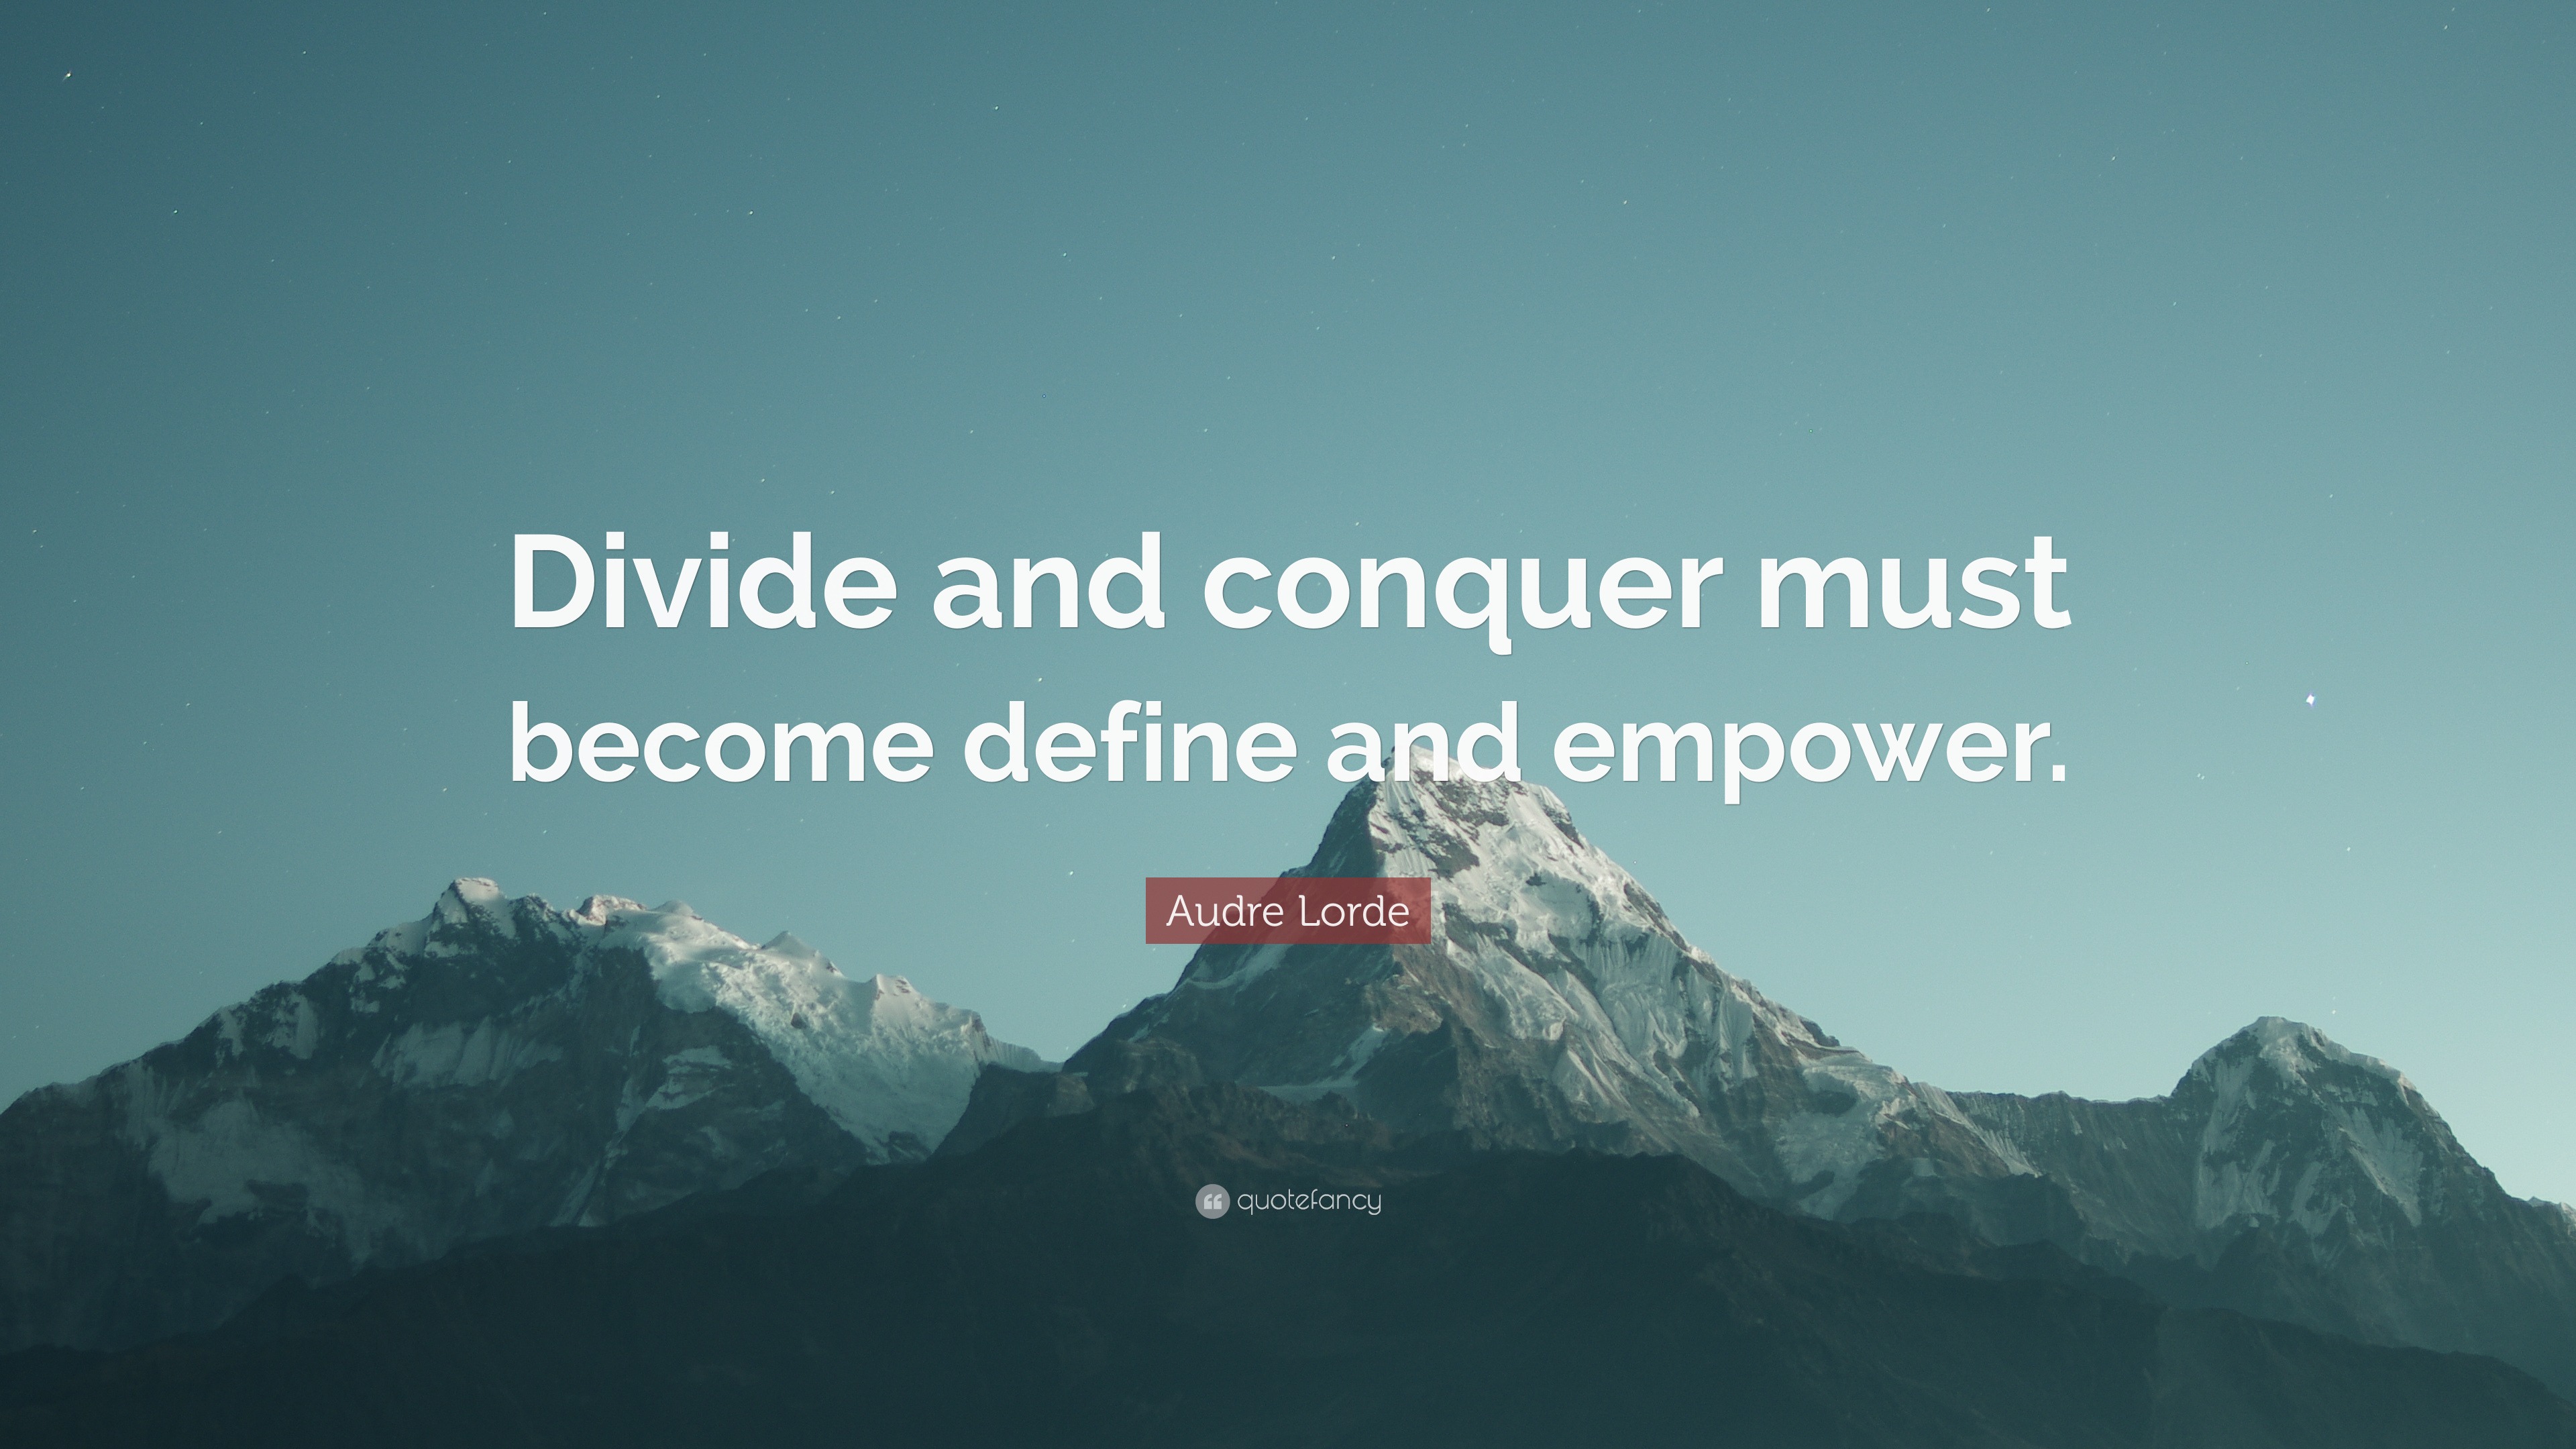 divide and conquer quote